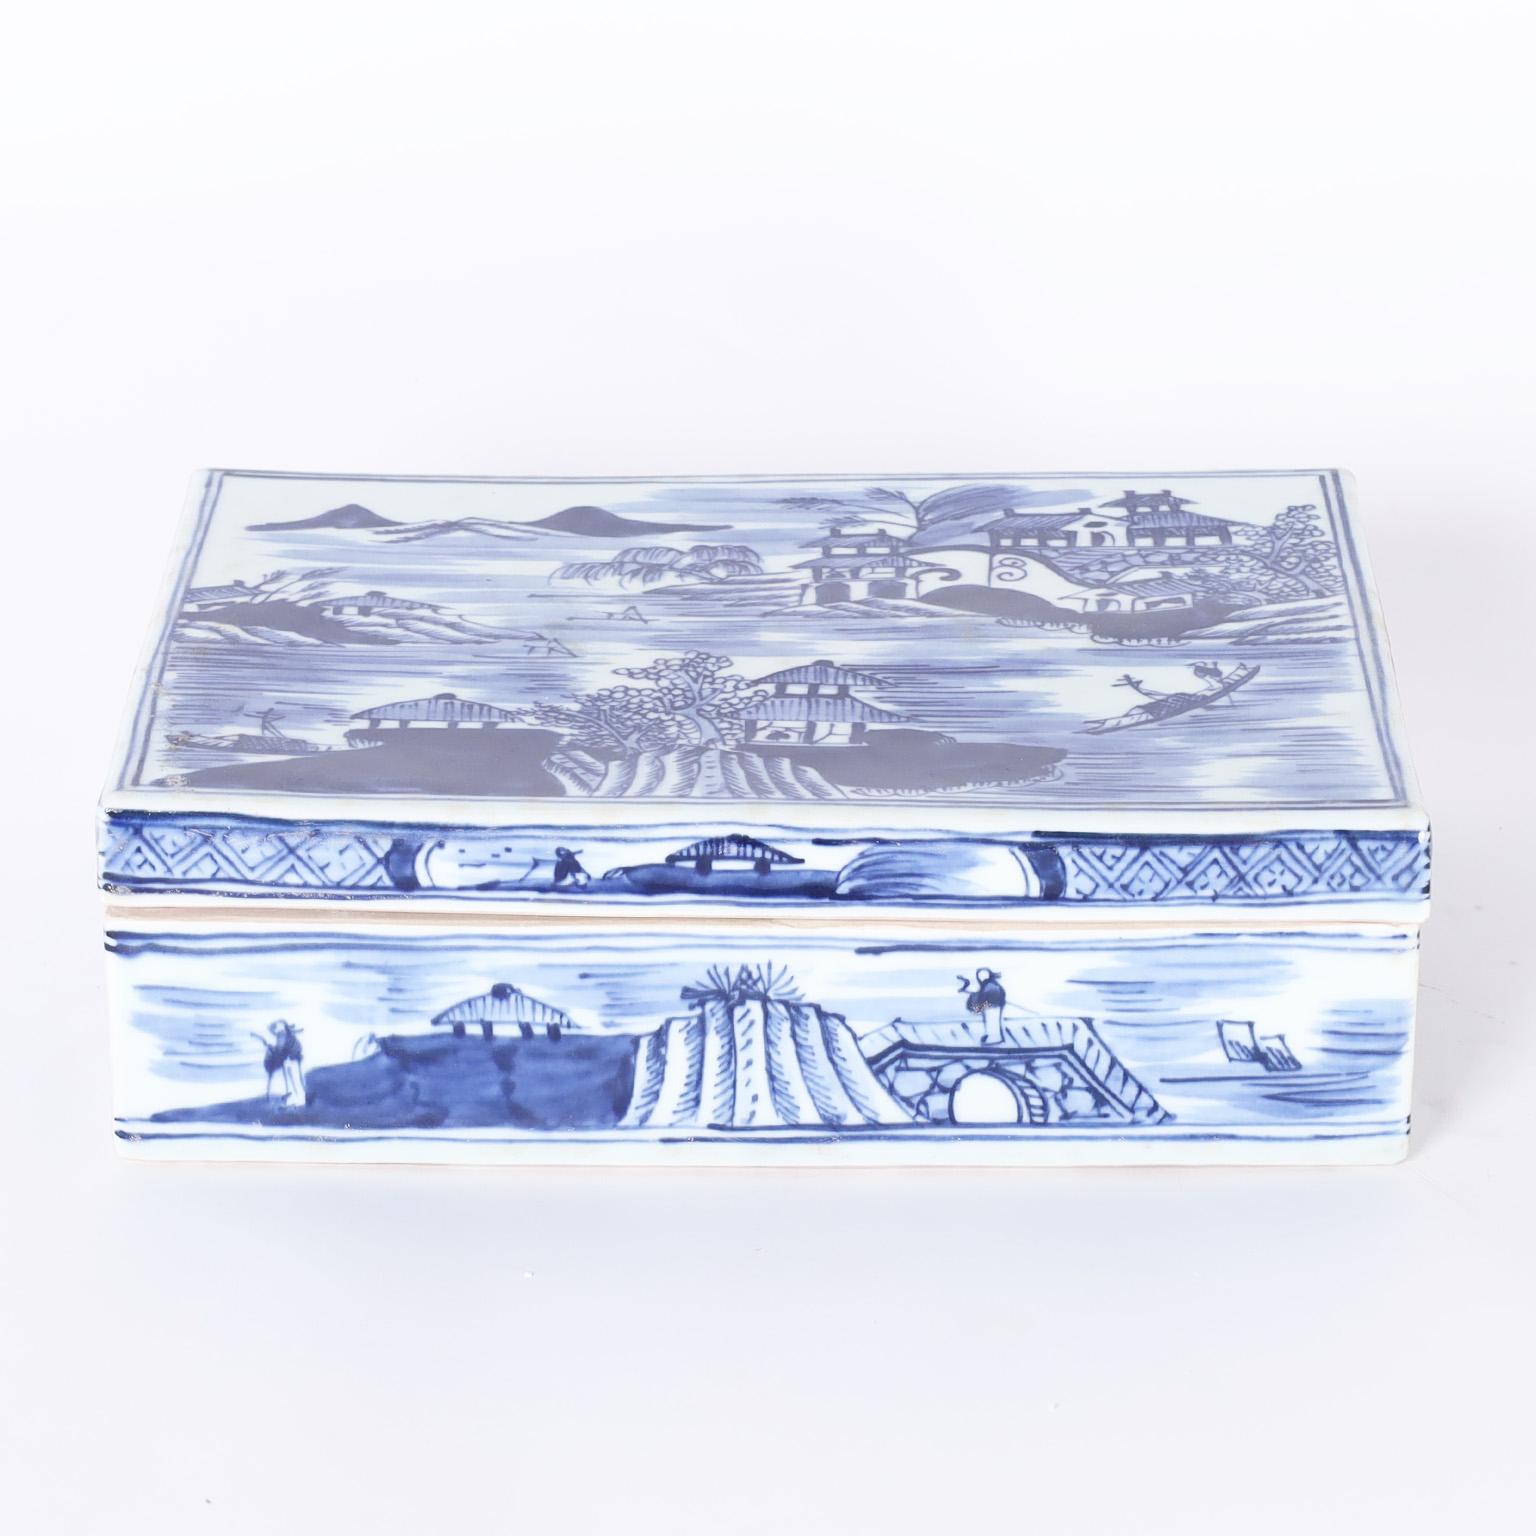 Chinese blue and white rectangular lidded box hand decorated with chinoiserie scenes with architecture, water, boats and figures.